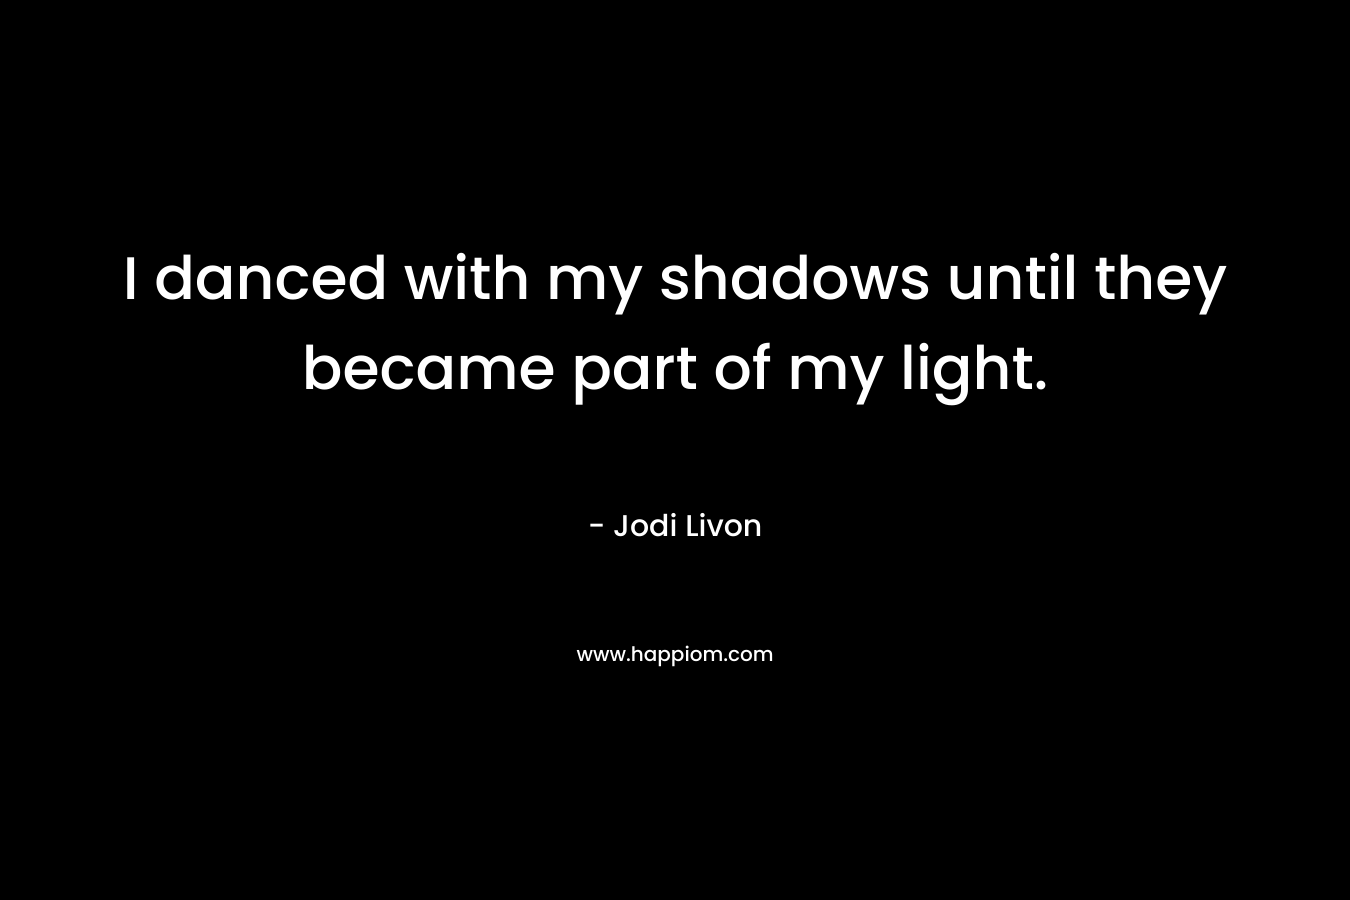 I danced with my shadows until they became part of my light. – Jodi Livon